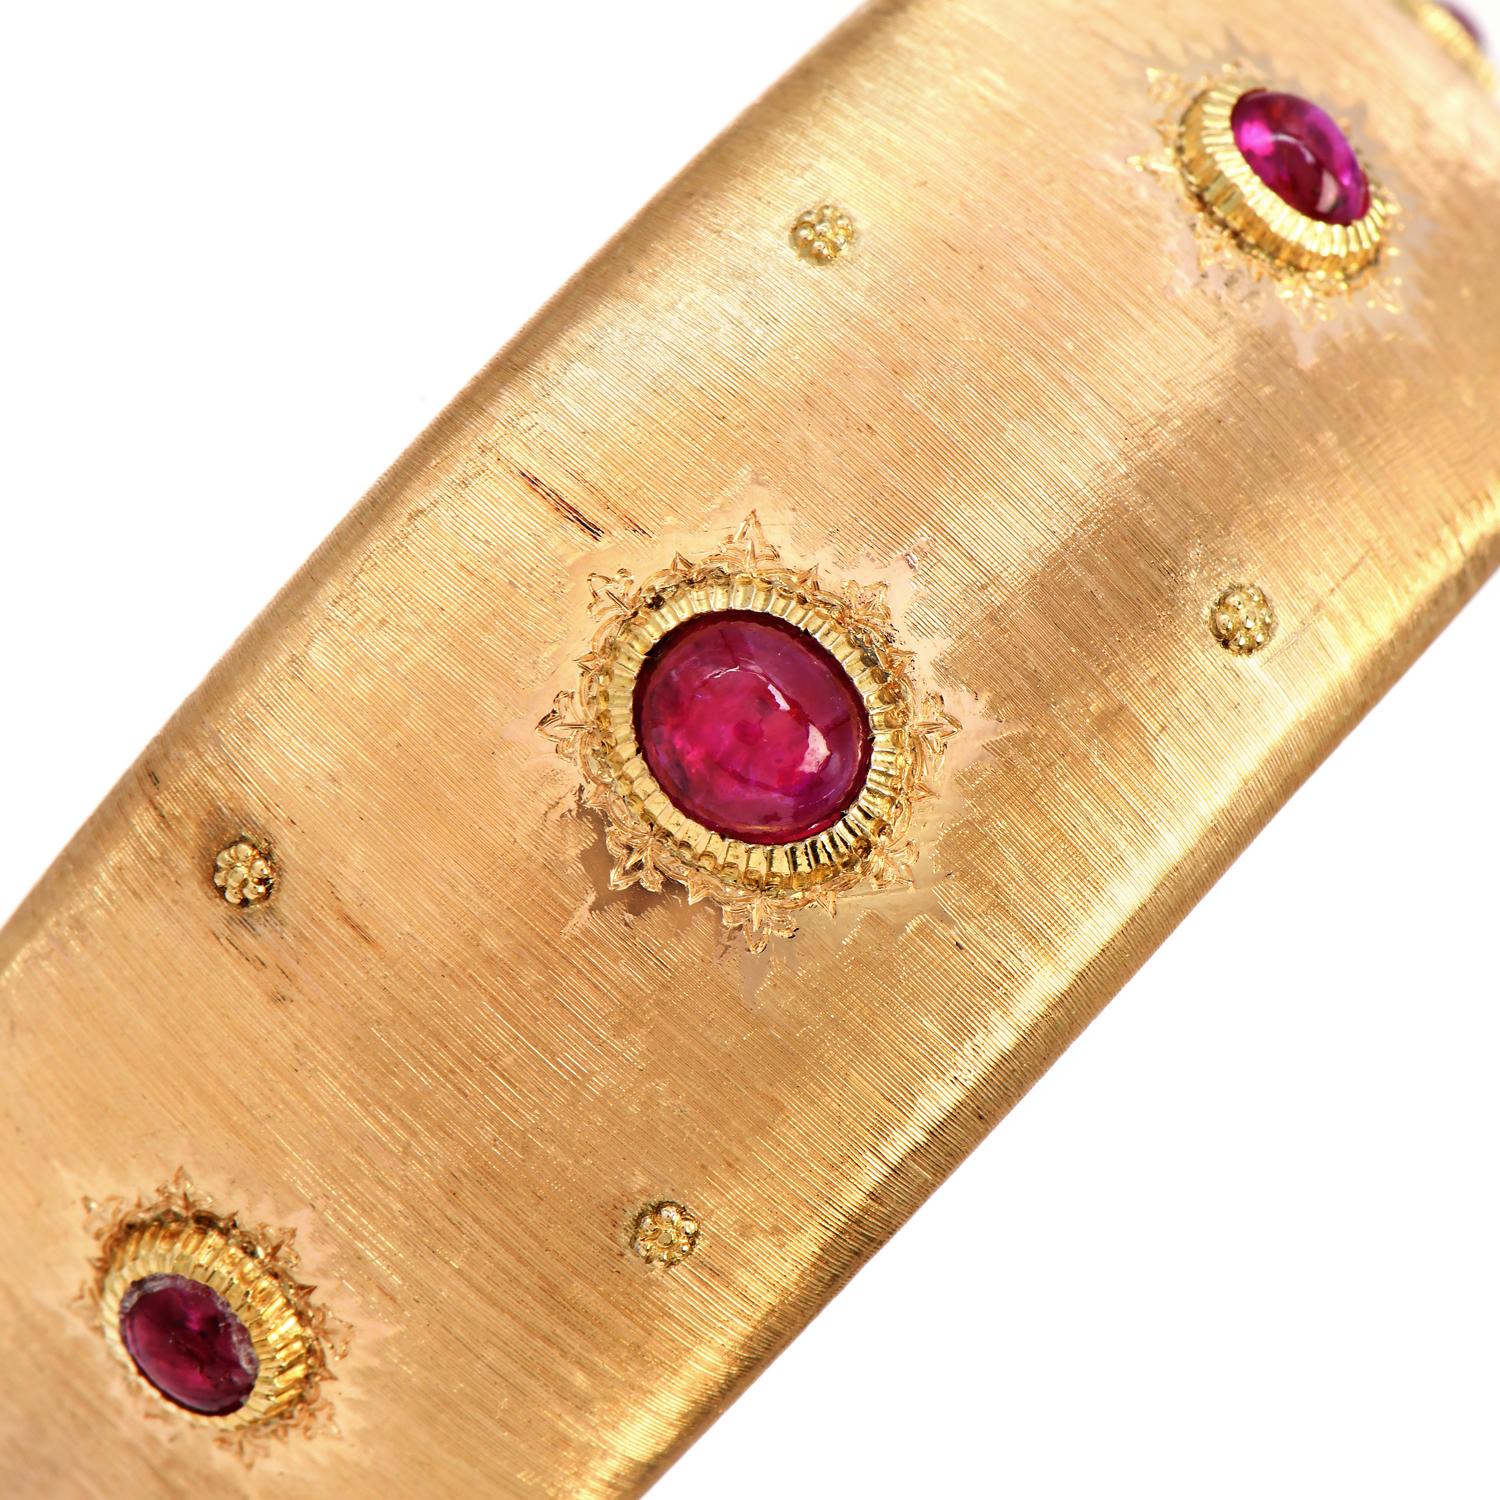 Vintage M. Buccellati Ruby Cuff Bracelet,

Inspired by the power of the flowers, is 34.0 Grams of Luxurious 18K Yellow Gold.

with the Rigato satin finish is a characteristic style of the House of Buccellati.

Adorning the facade are 5